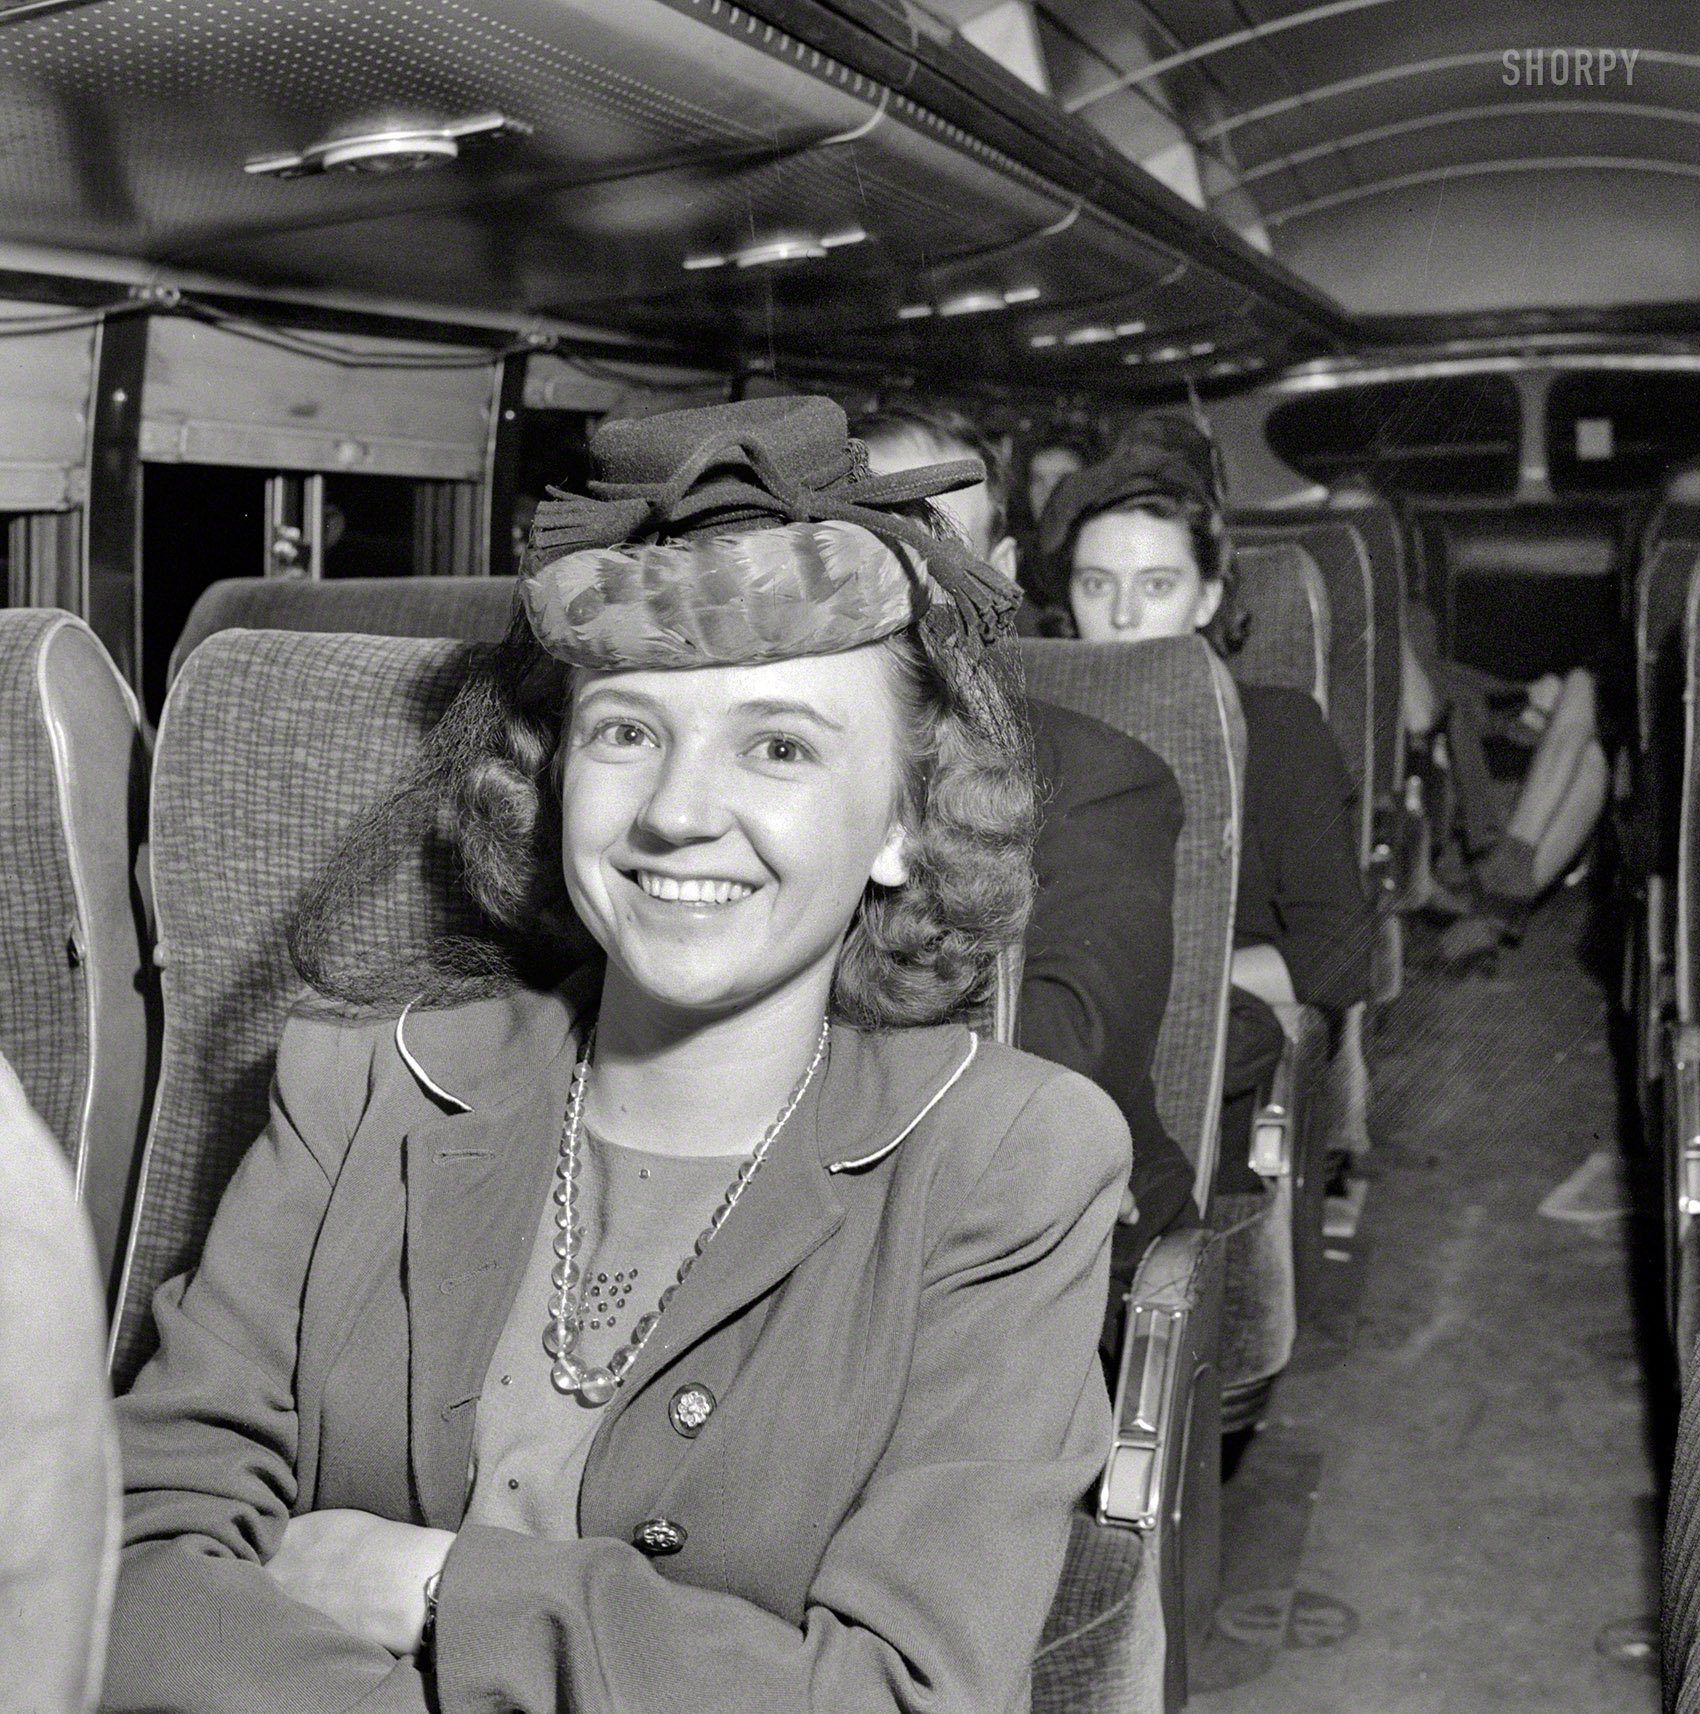 September 1943. "A Greyhound bus trip from Louisville to Memphis and the terminals. Roberta Locker, going to Chattanooga from Elora, Tenn., to work." Co-starring Roberta's hat, an elaborate construction of netting, fabric and feathers. Photo by Esther Bubley for the Office of War Information. View full size.